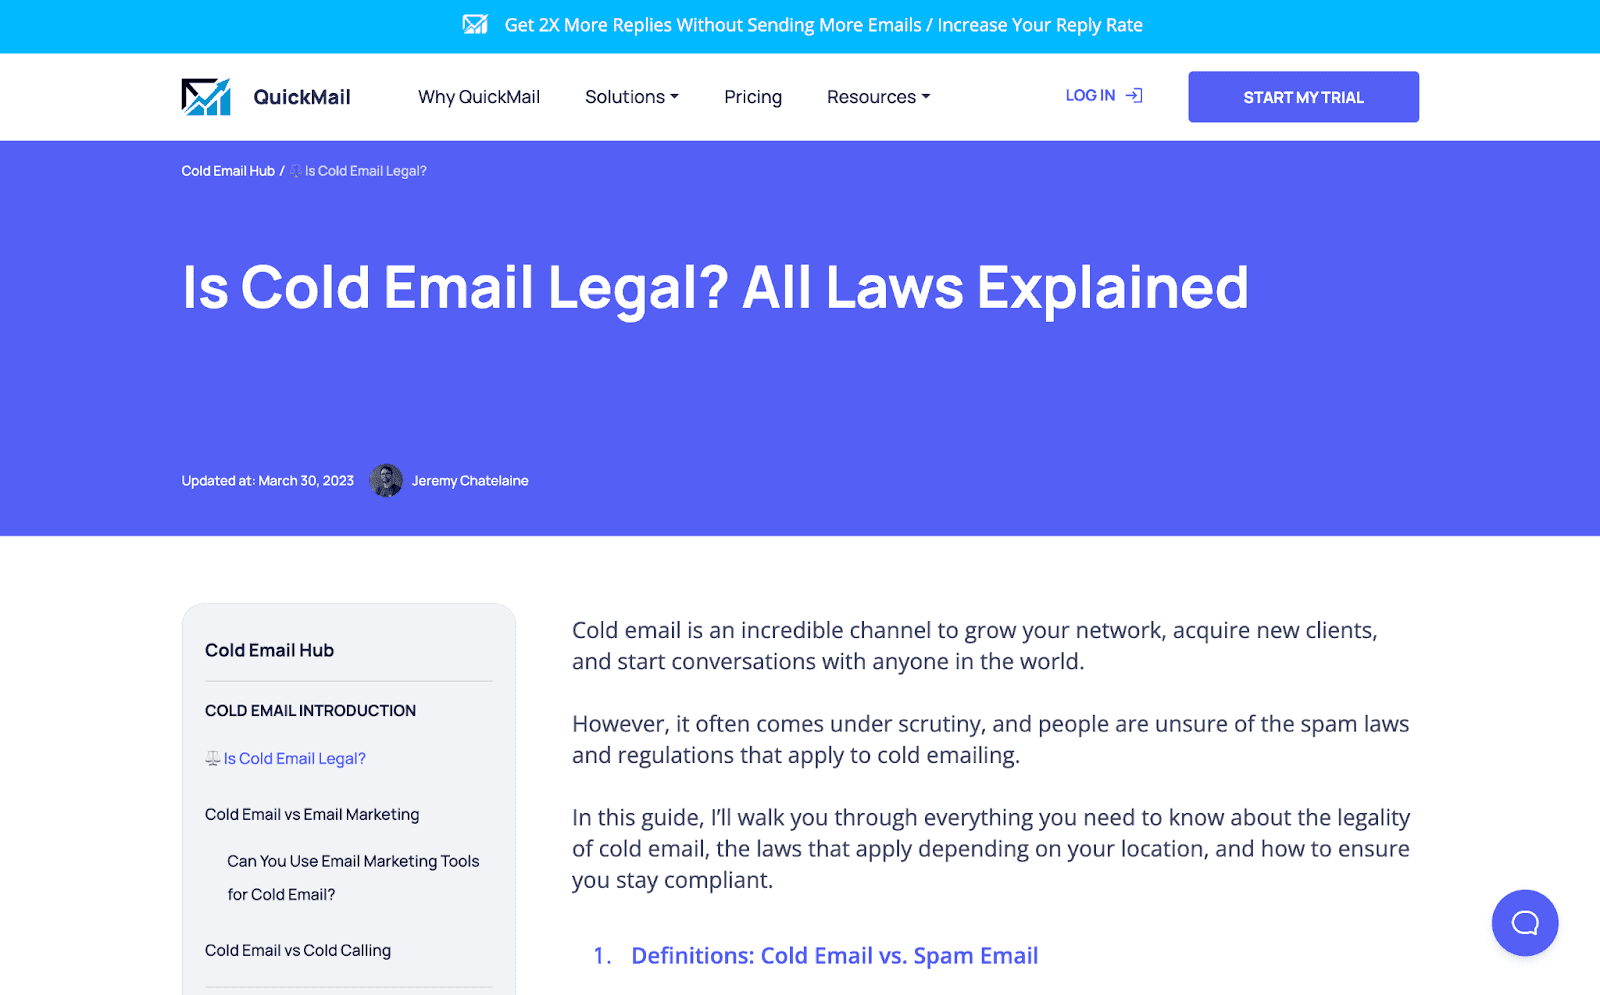 A page by quickmail addressing the laws of cold email explained and if it is legal or not.